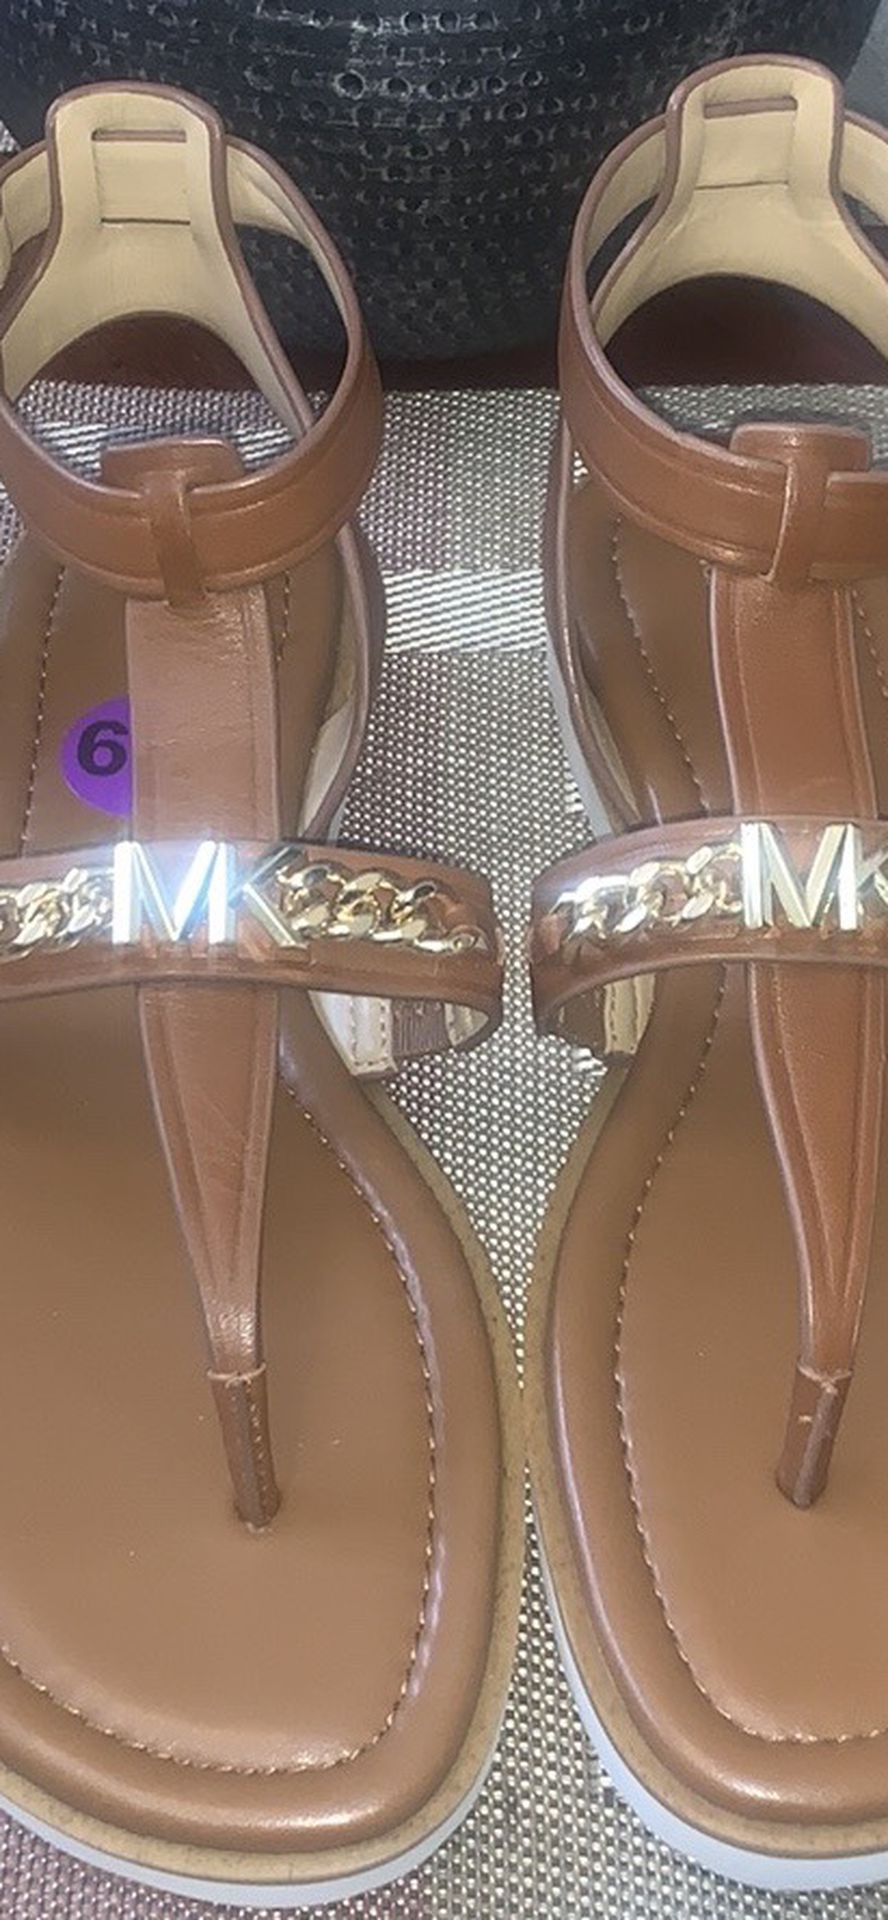 Michael Kors Women Sandals Size 6 and 6.5 Available